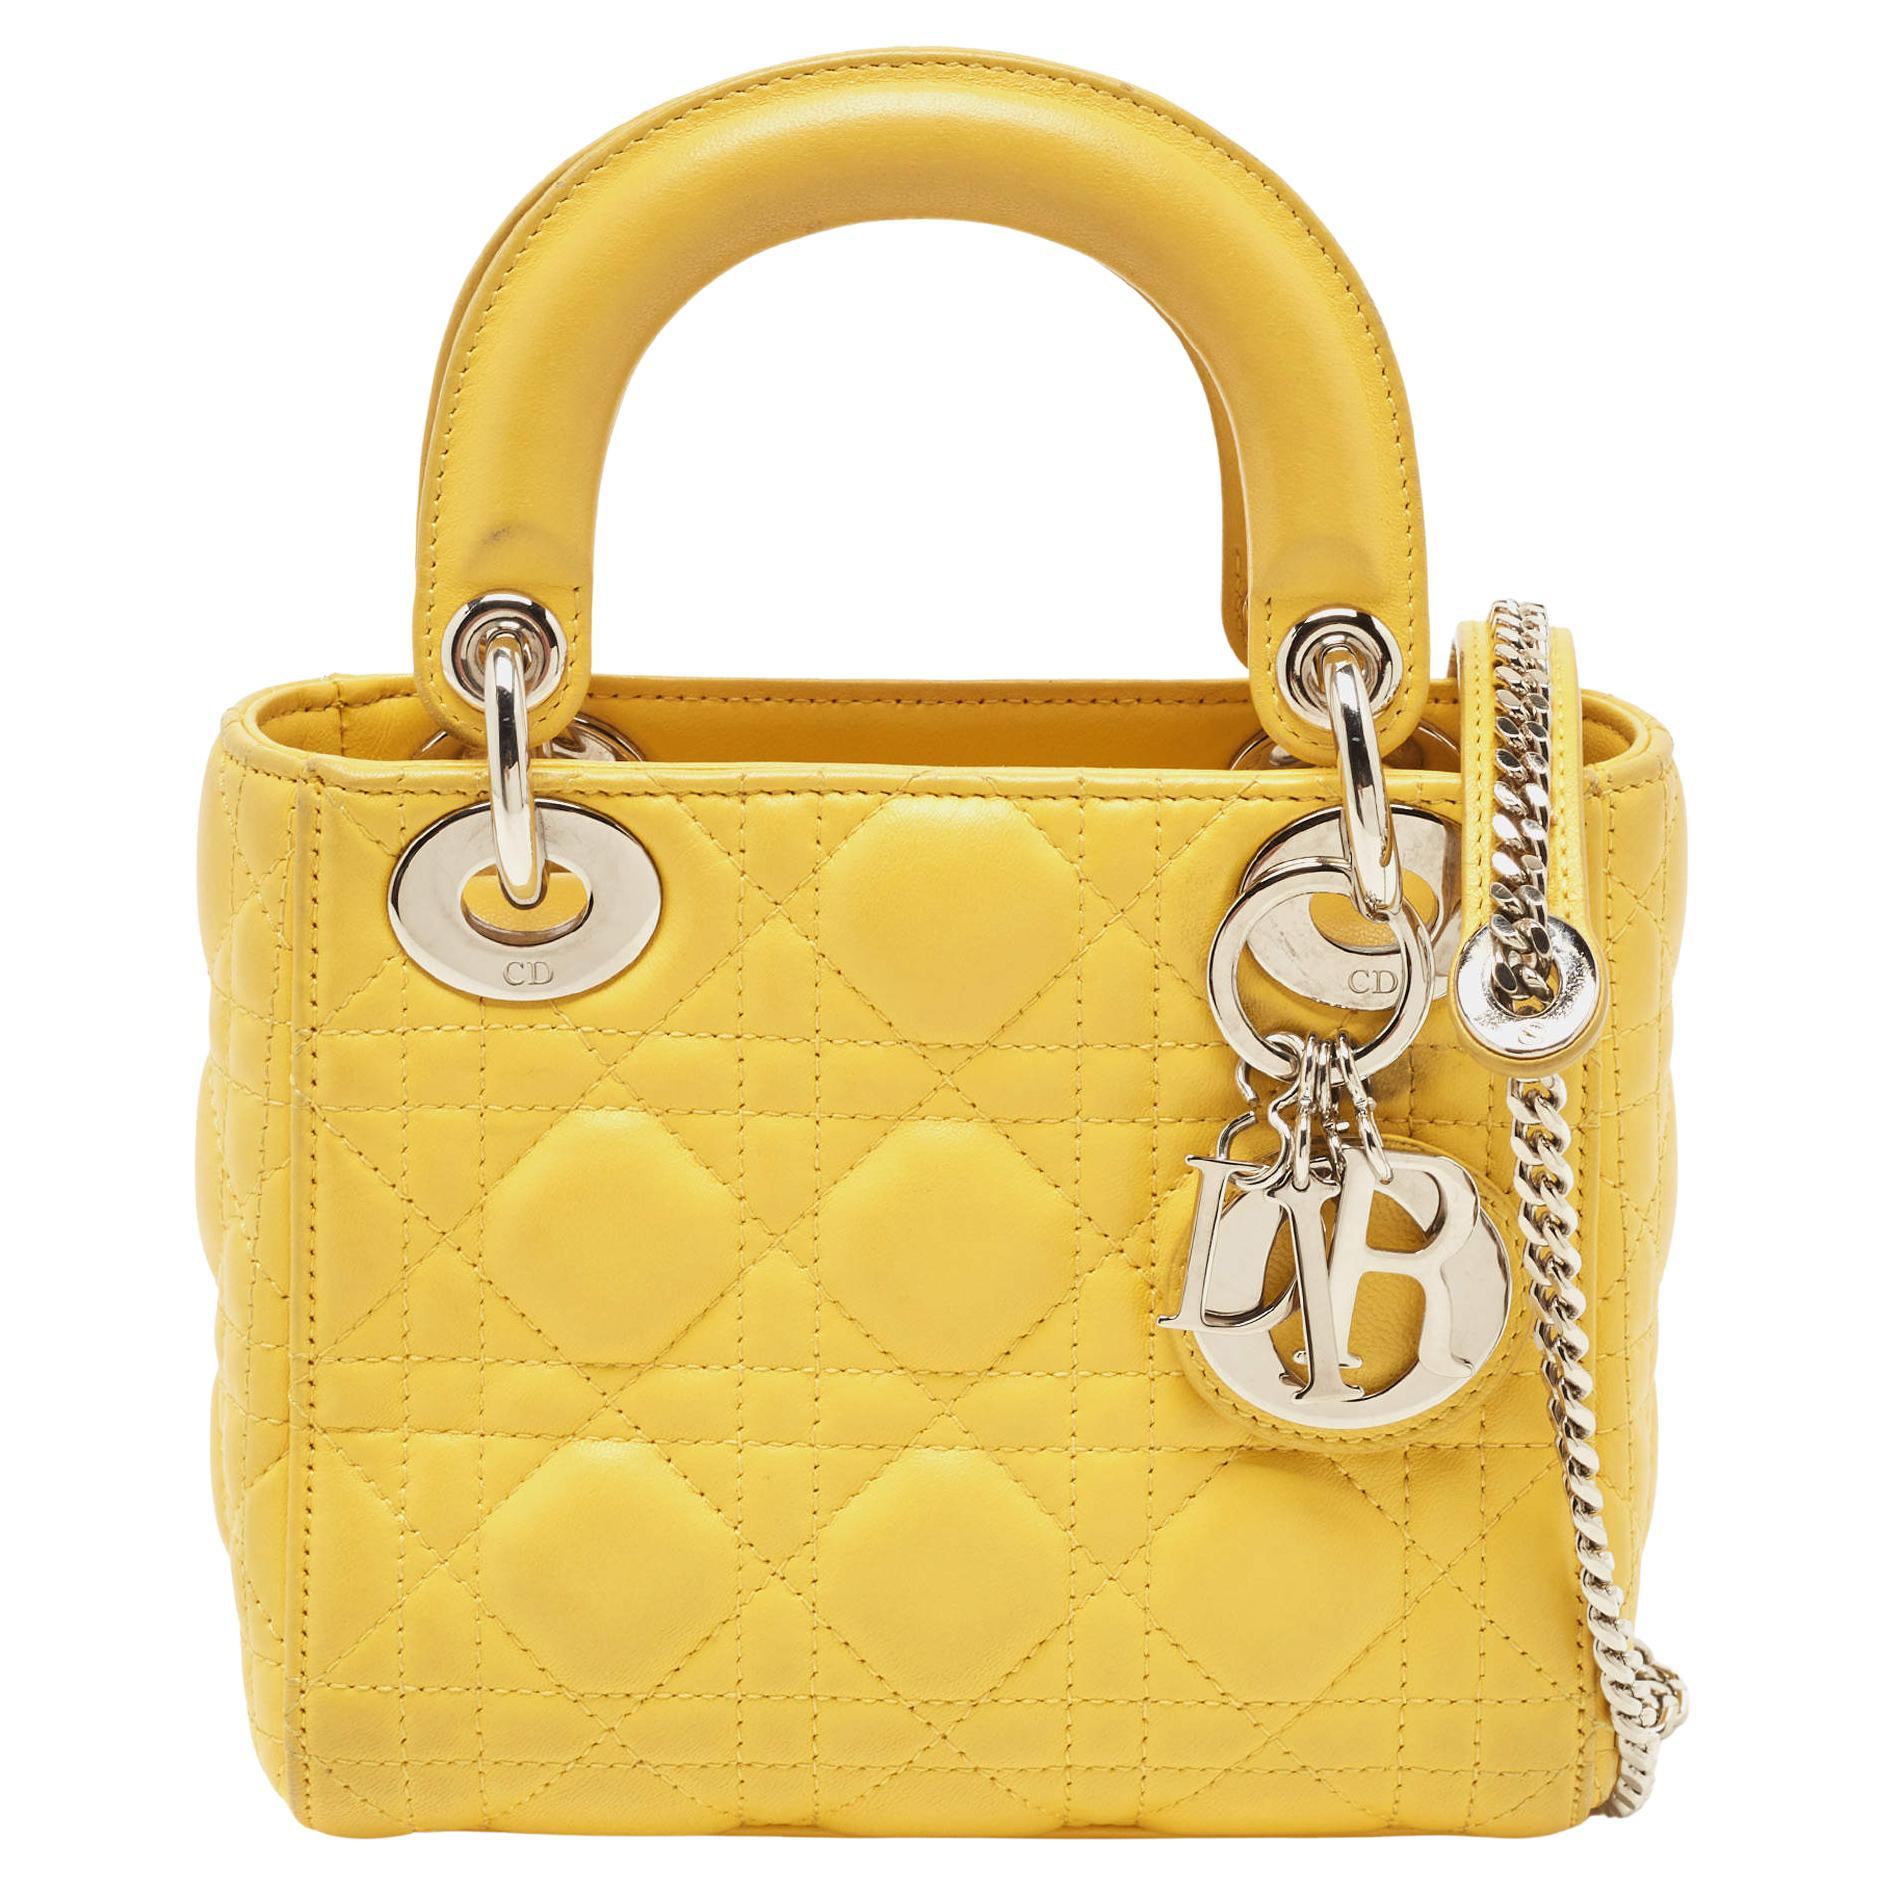 Chanel Mustard Yellow Caviar Leather Timeless CC Chain Tote Bag 1115c5